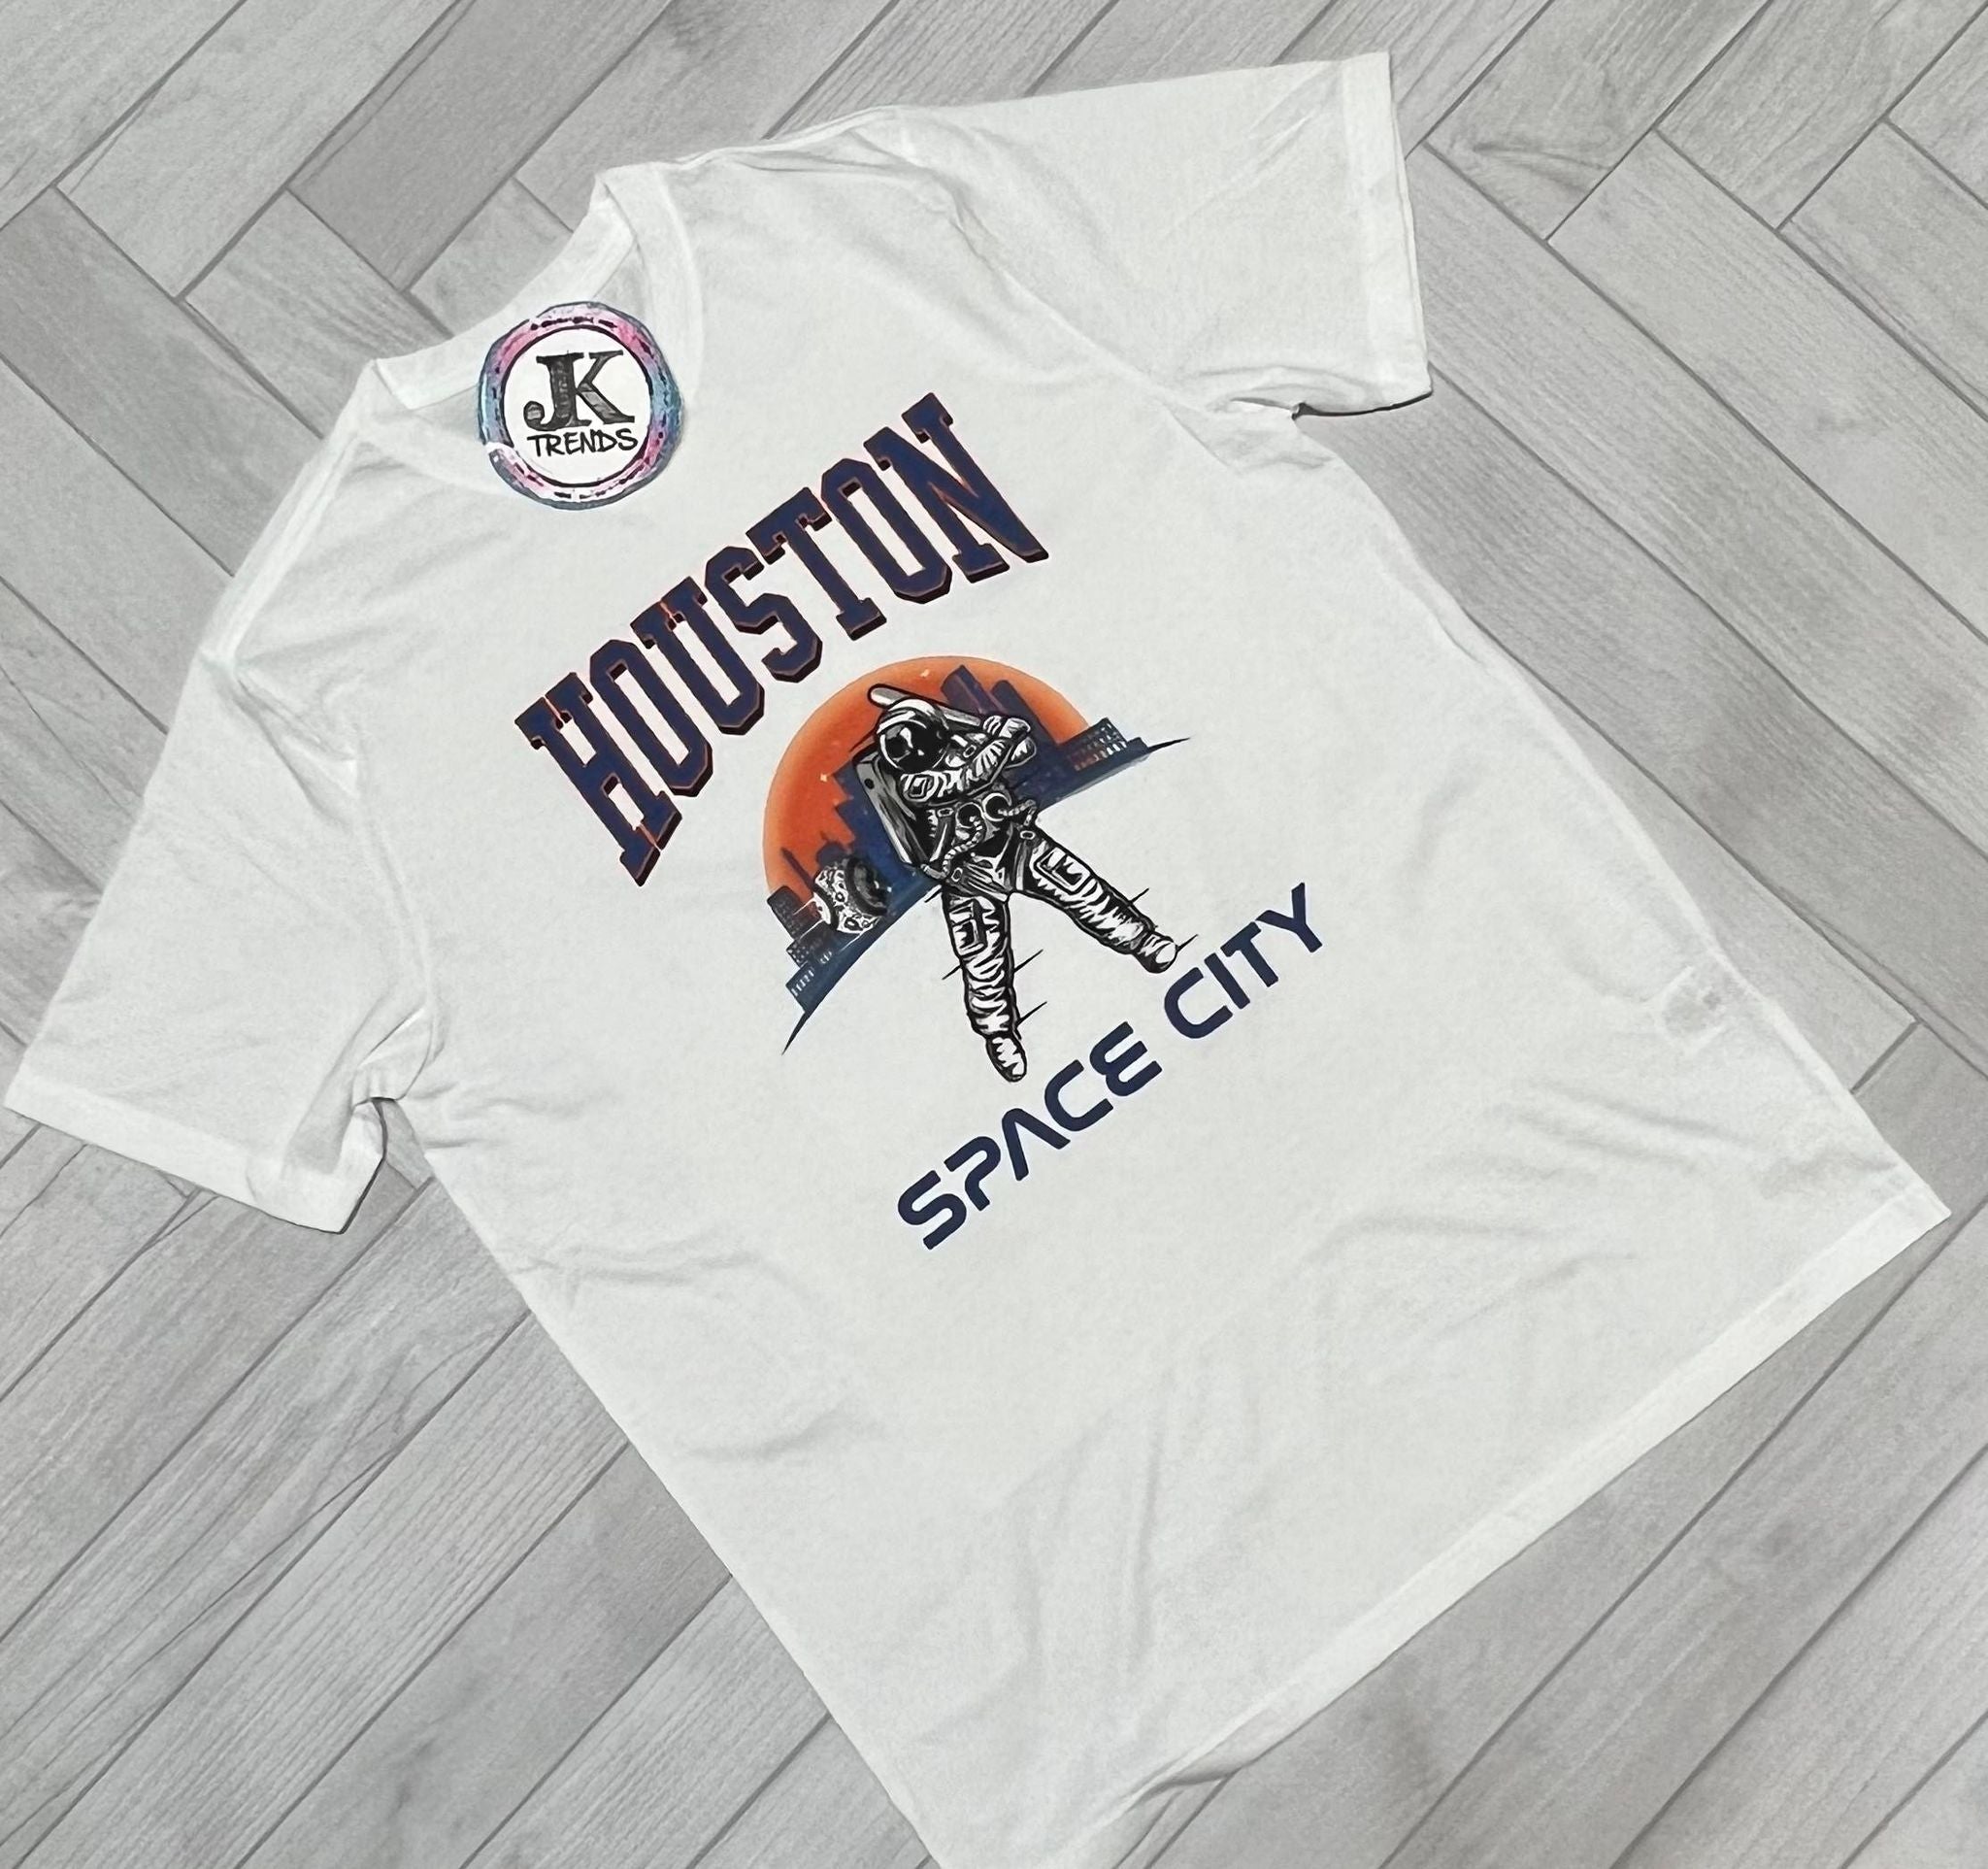 JK Trends Houston We Have World Series Champions 2022 Astros Astronaut Short Sleeved Shirt Youth Small / Platinum (Really Light Gray)